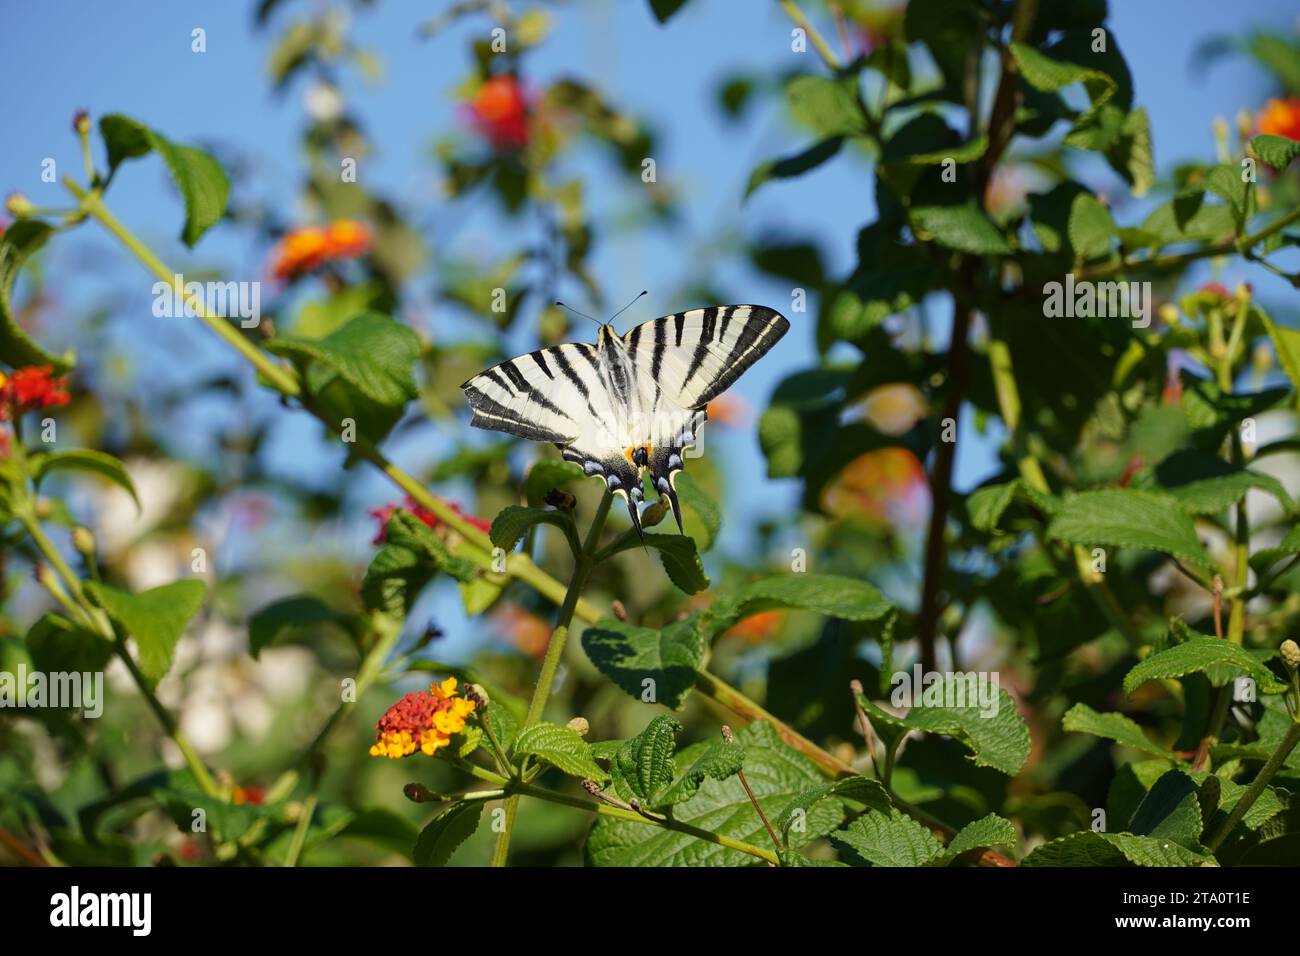 A scarce swallowtail or Iphiclides podalirius butterfly on lantana camara flowers, in Athens, Greece Stock Photo